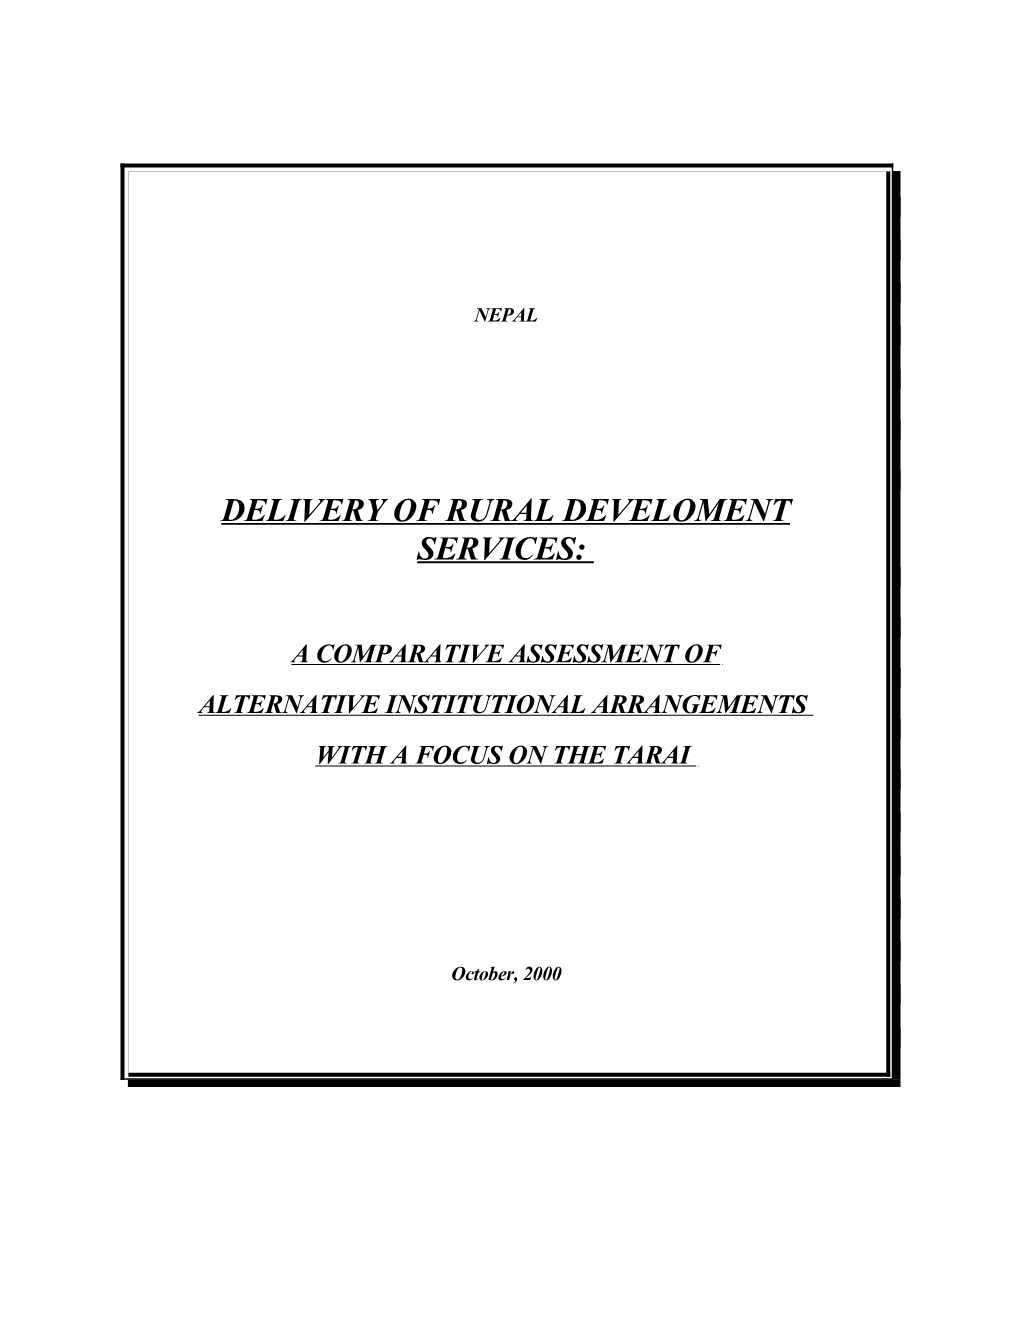 Delivery of Rural Develoment Services